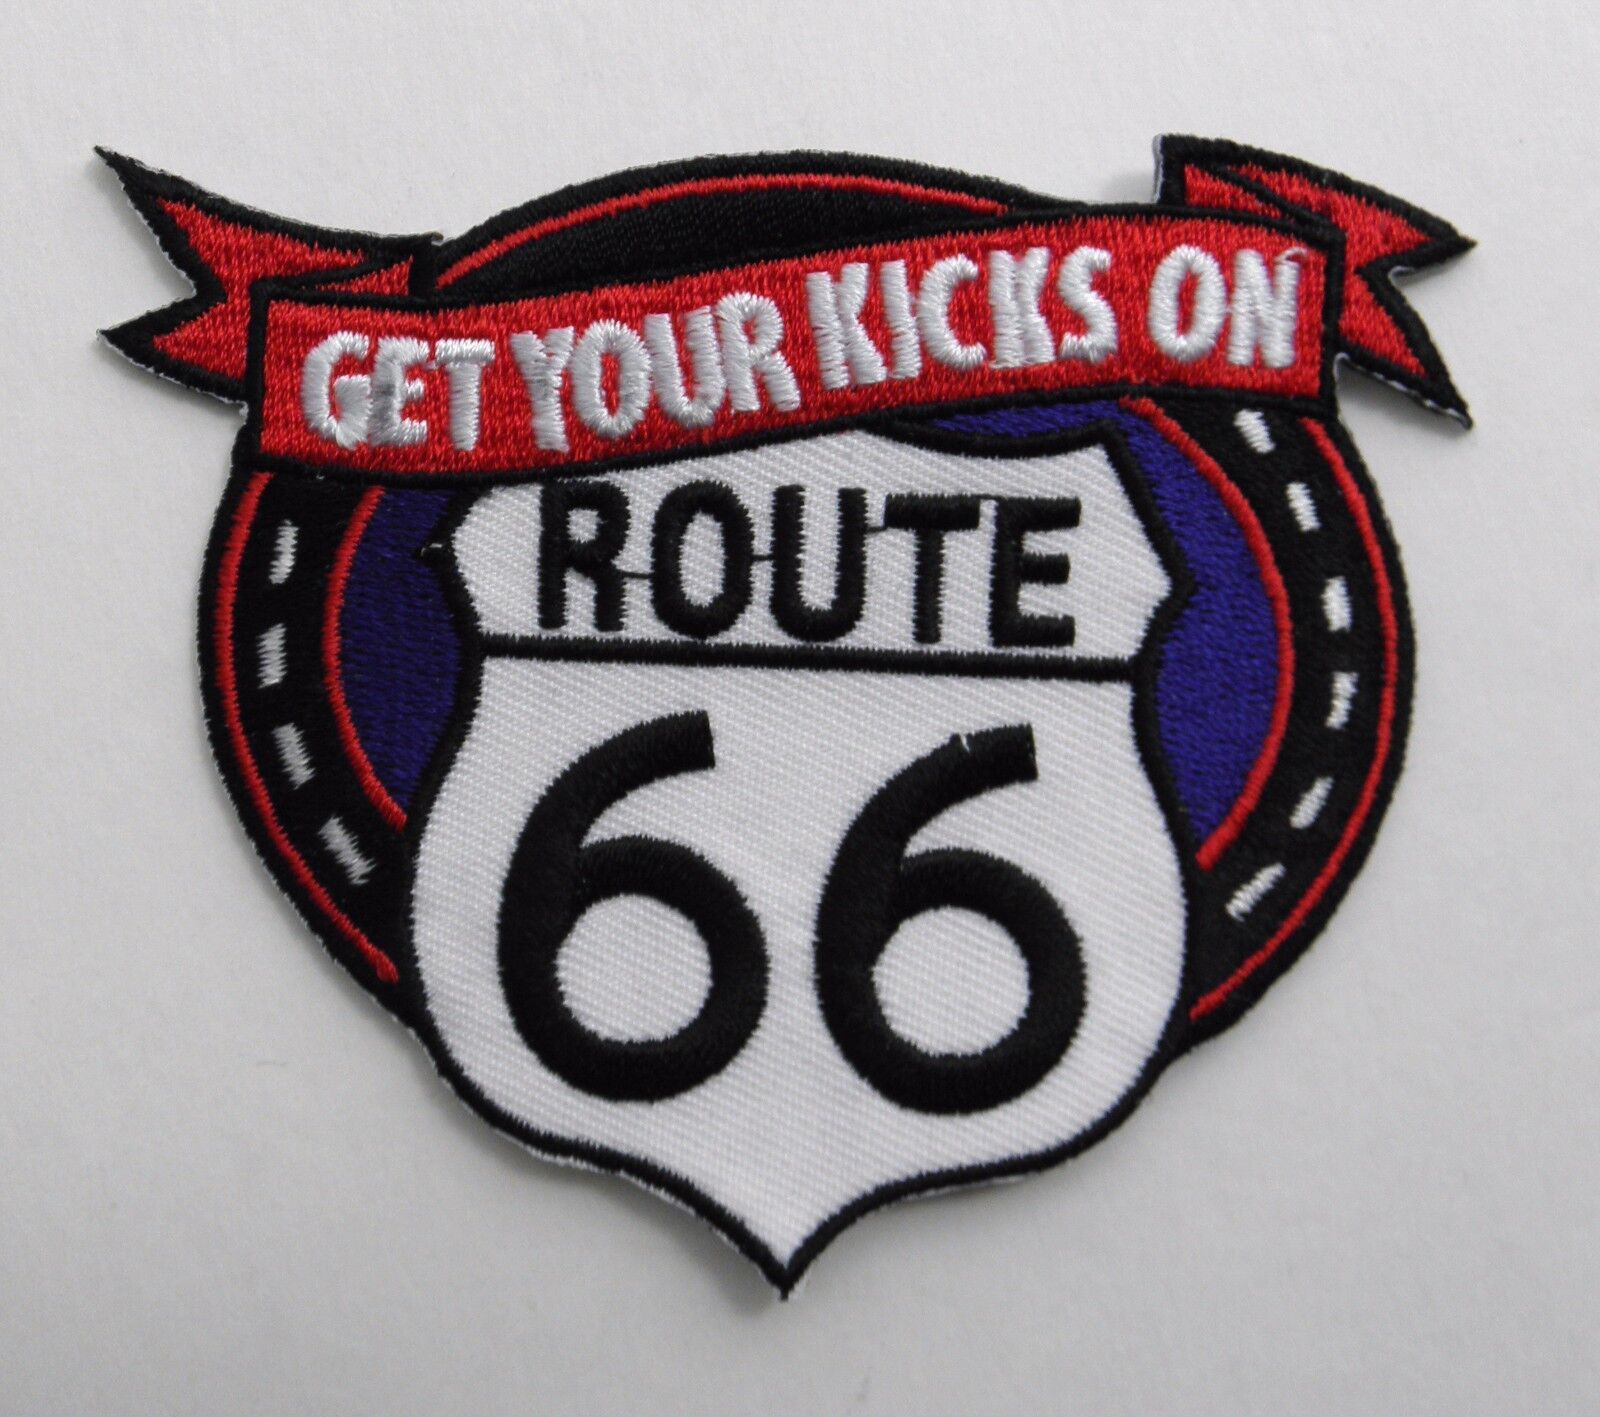 GET YOUR KICKS ON ROUTE 66 HIGHWAY EMBROIDERED PATCH 3.5 INCHES